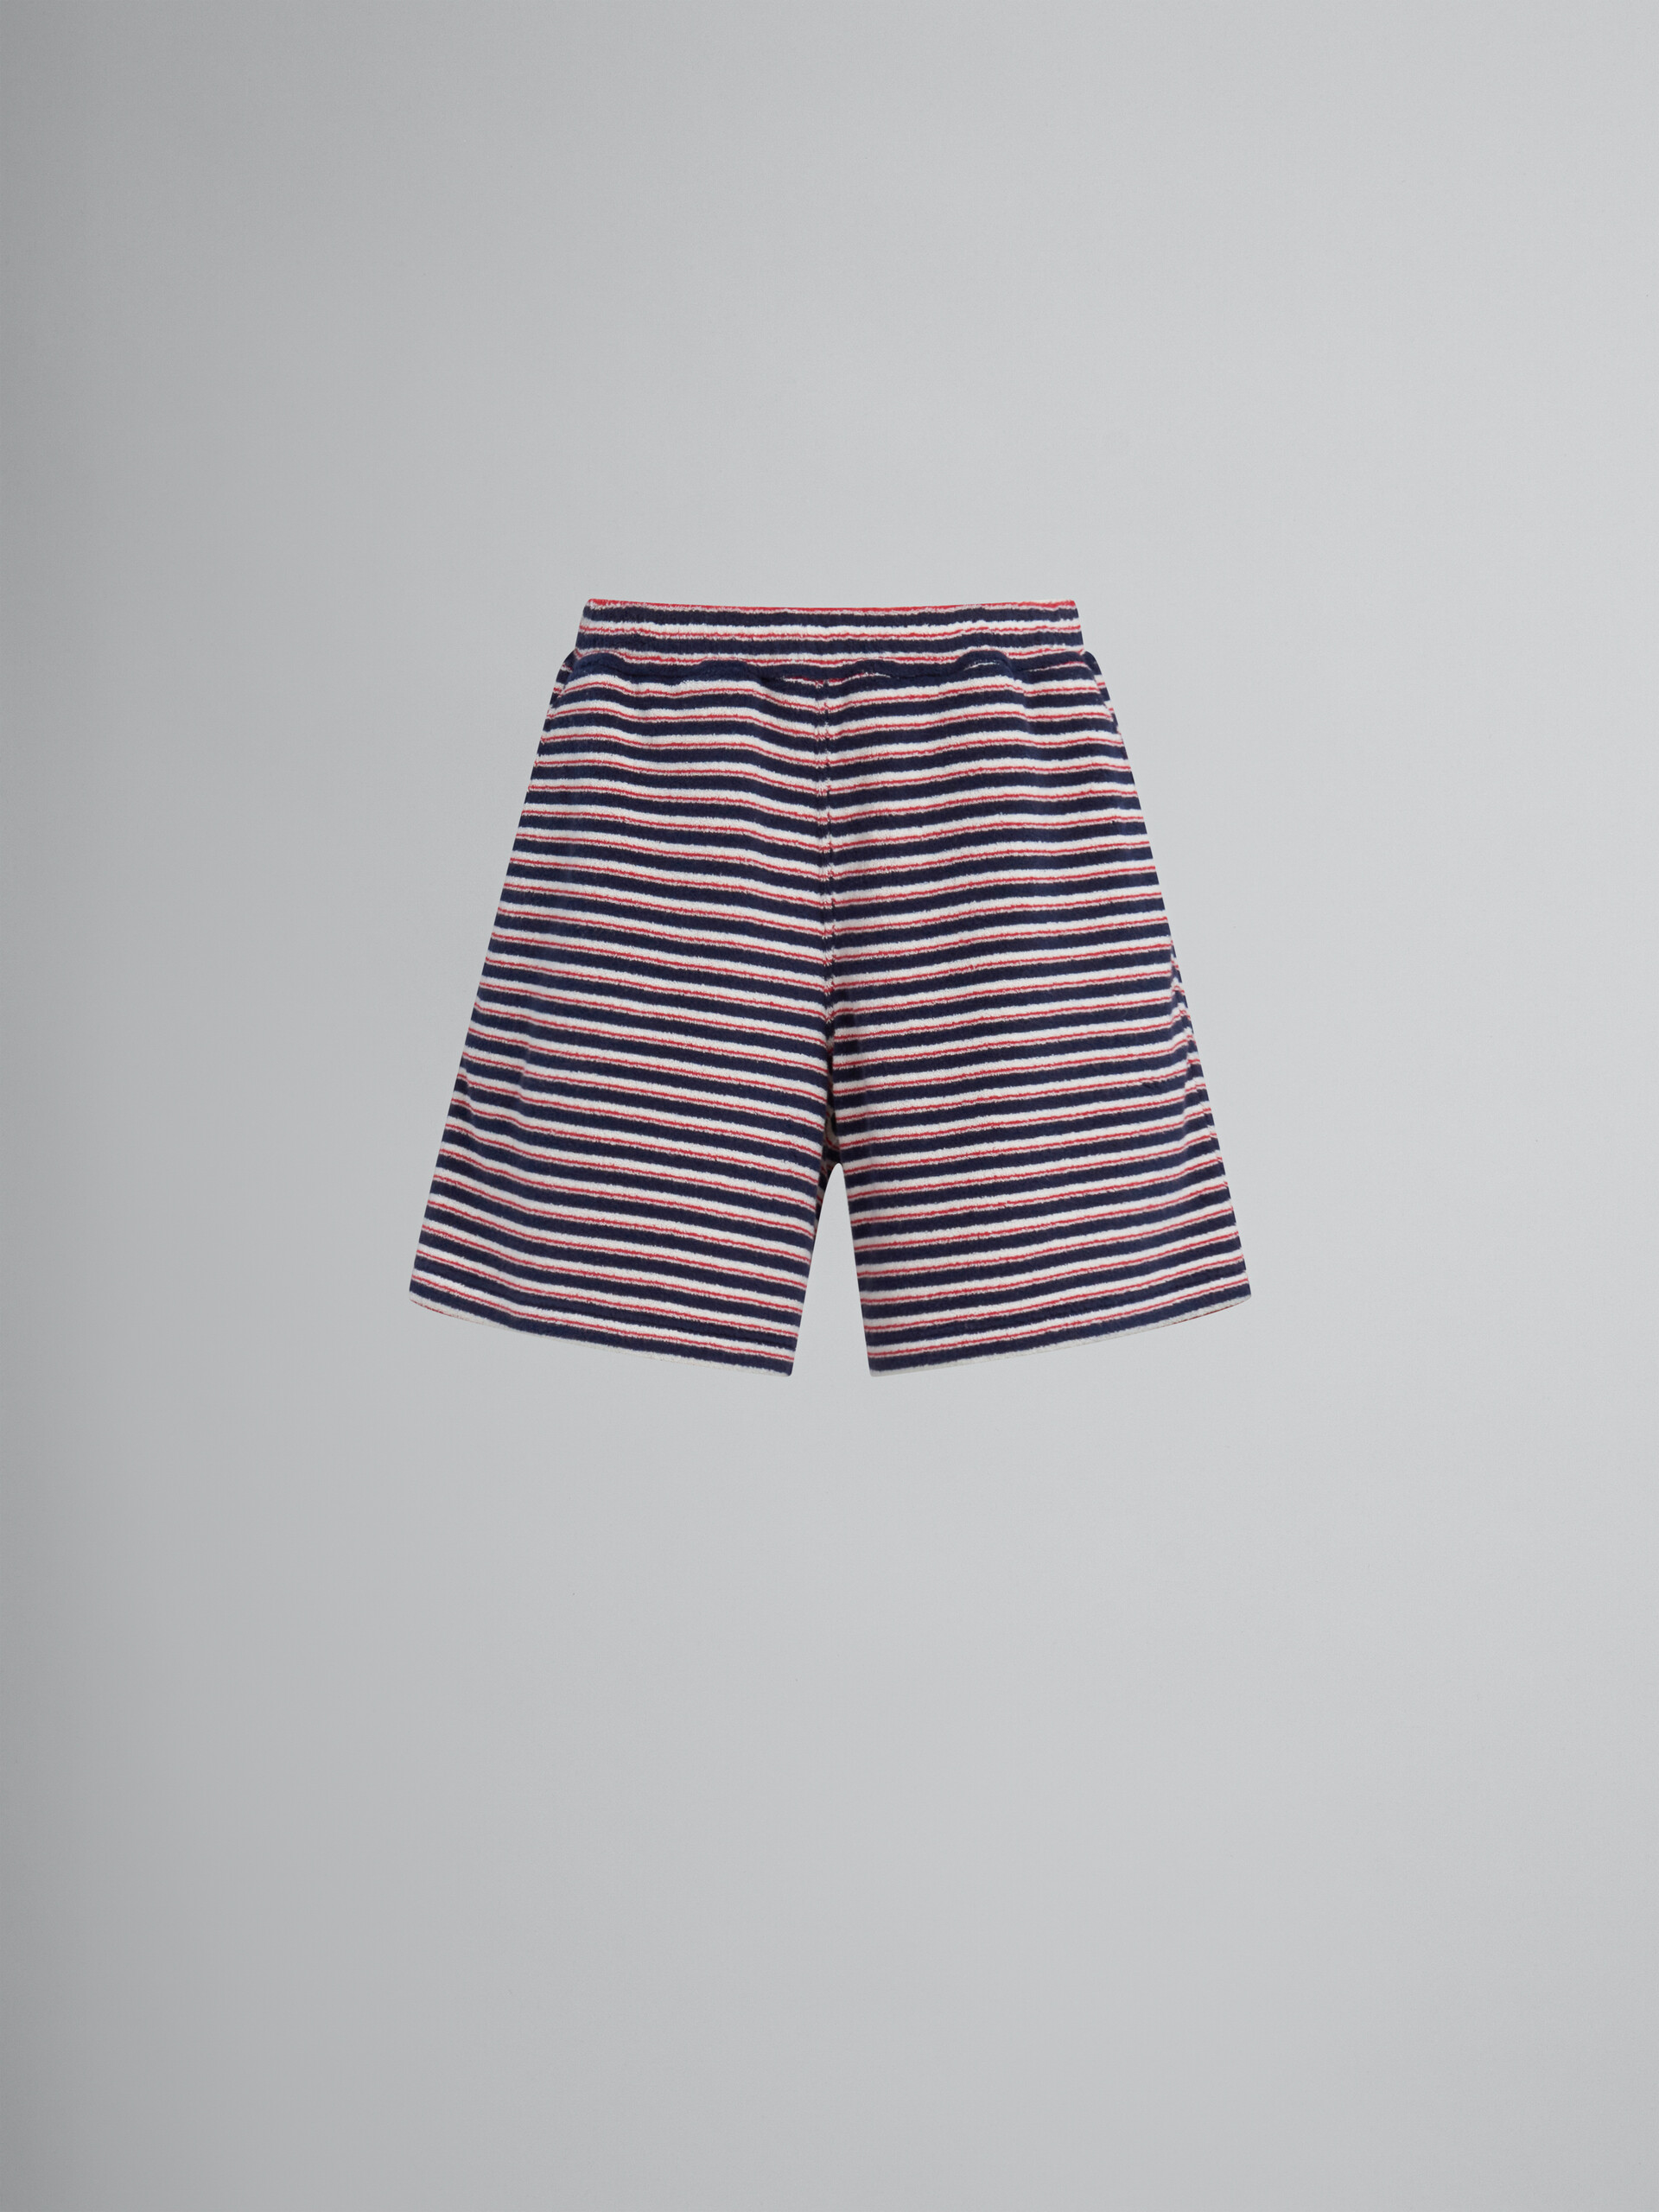 Red and blue striped terry shorts - Pants - Image 1